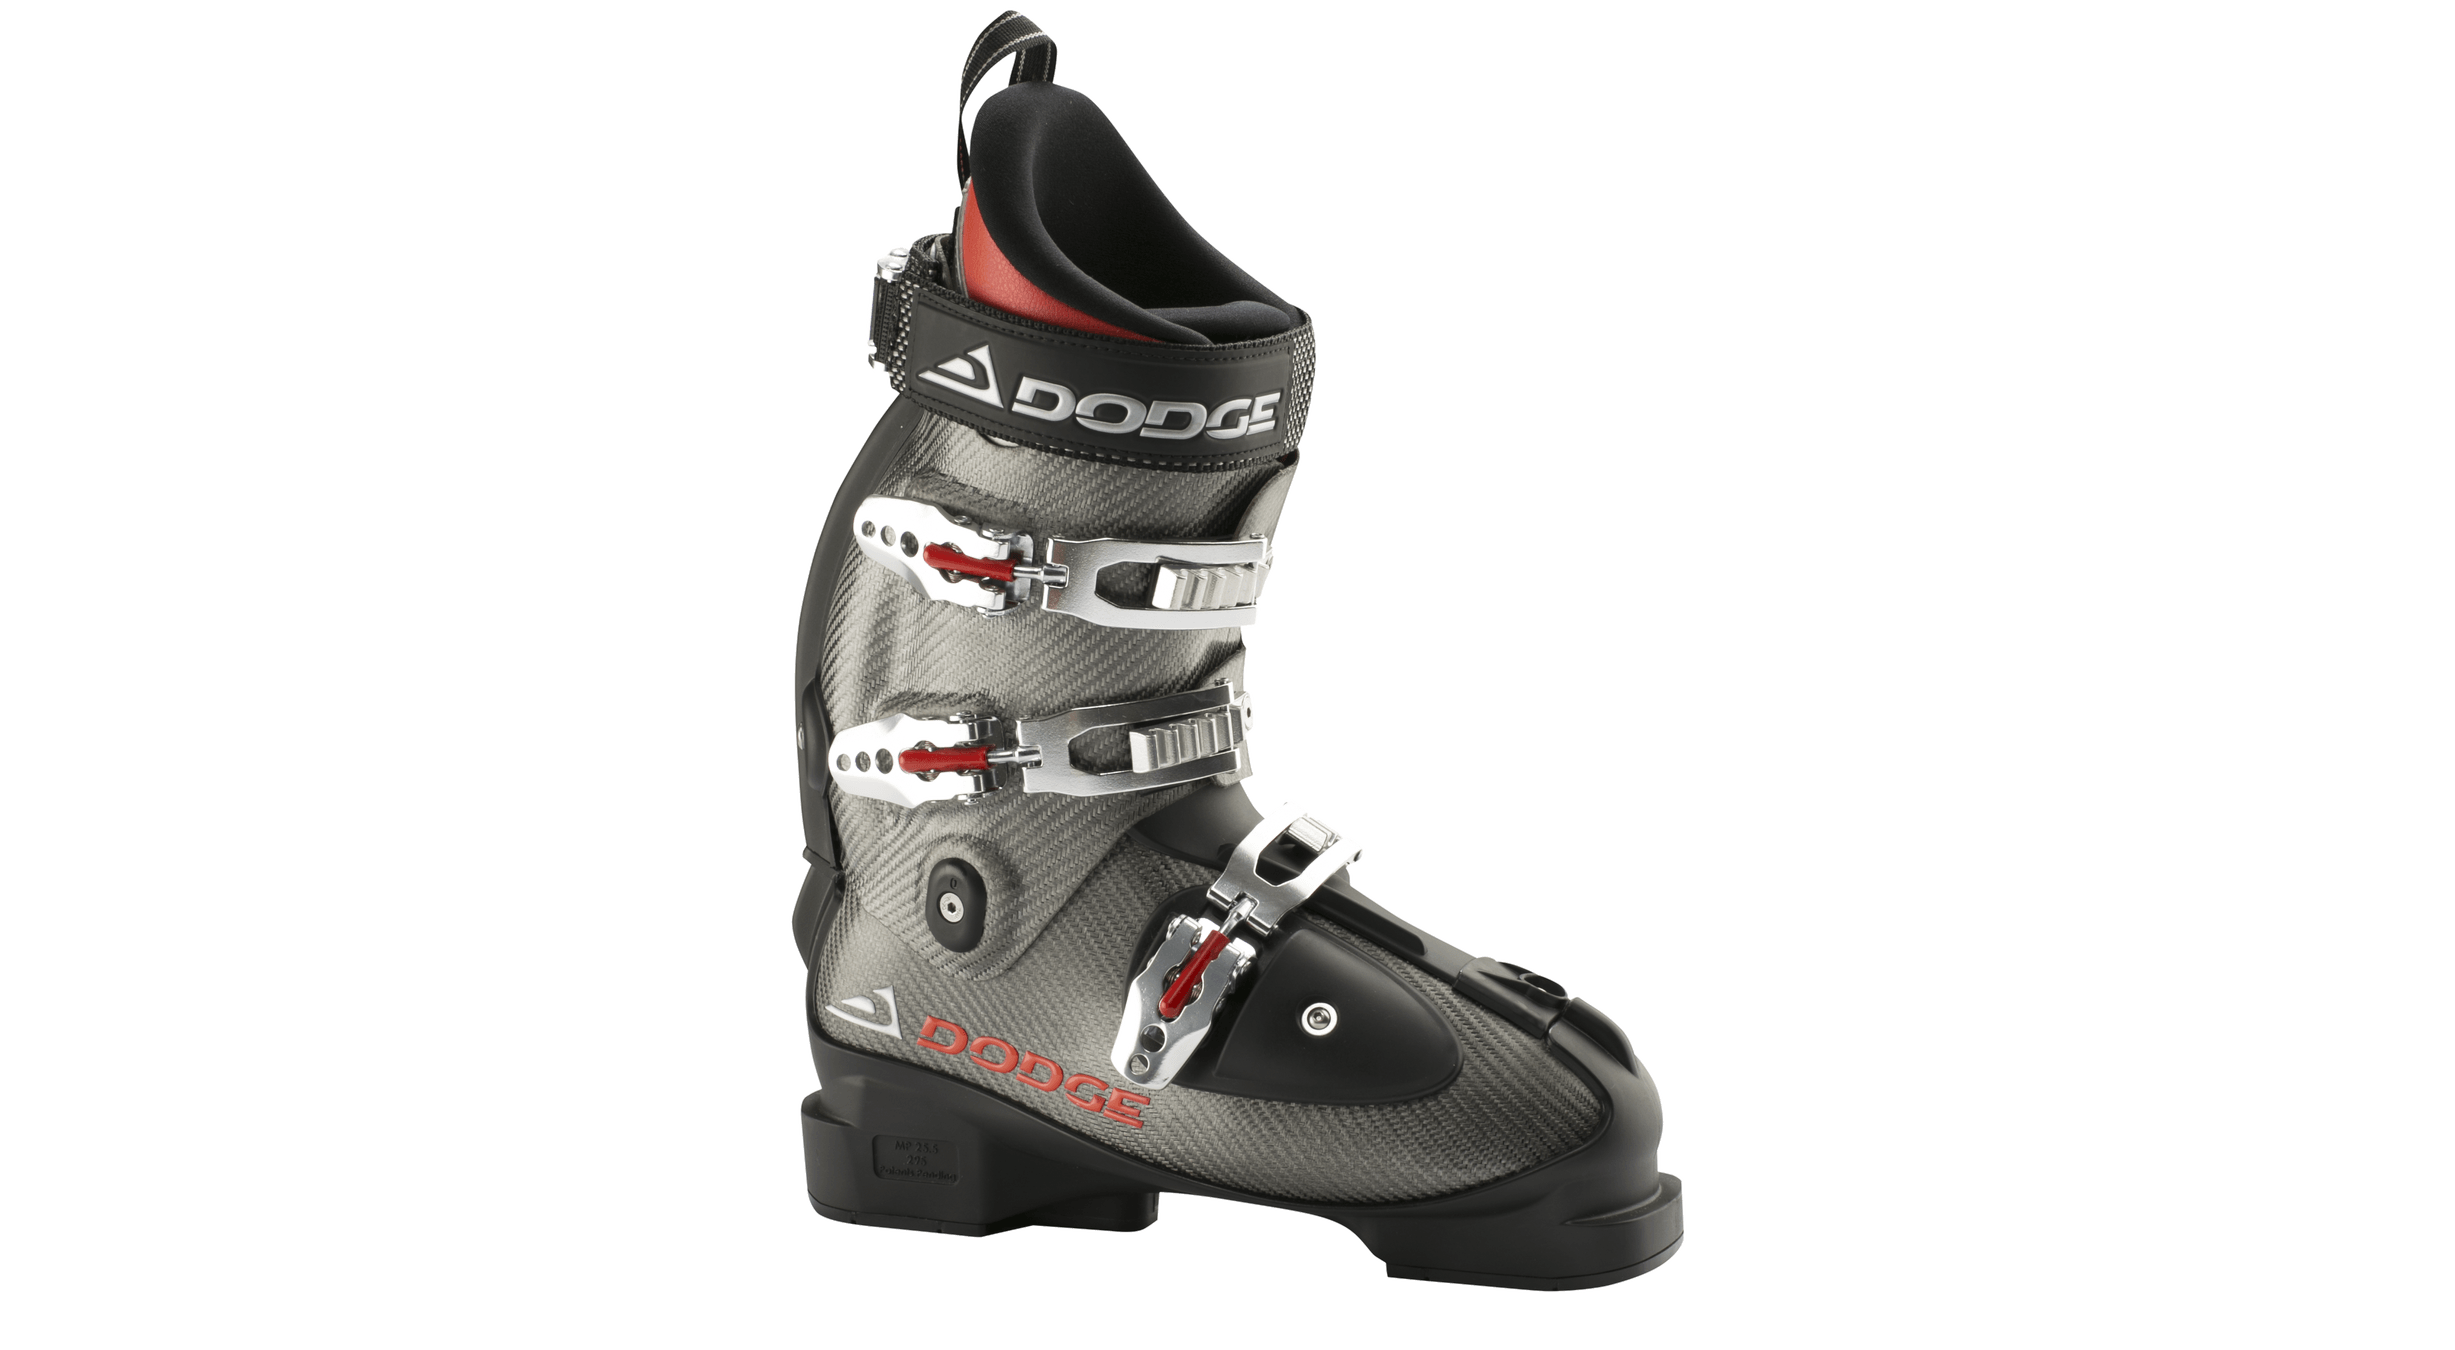 The Boot - 360 View, Technology, Benefits Carbon Fiber Boot